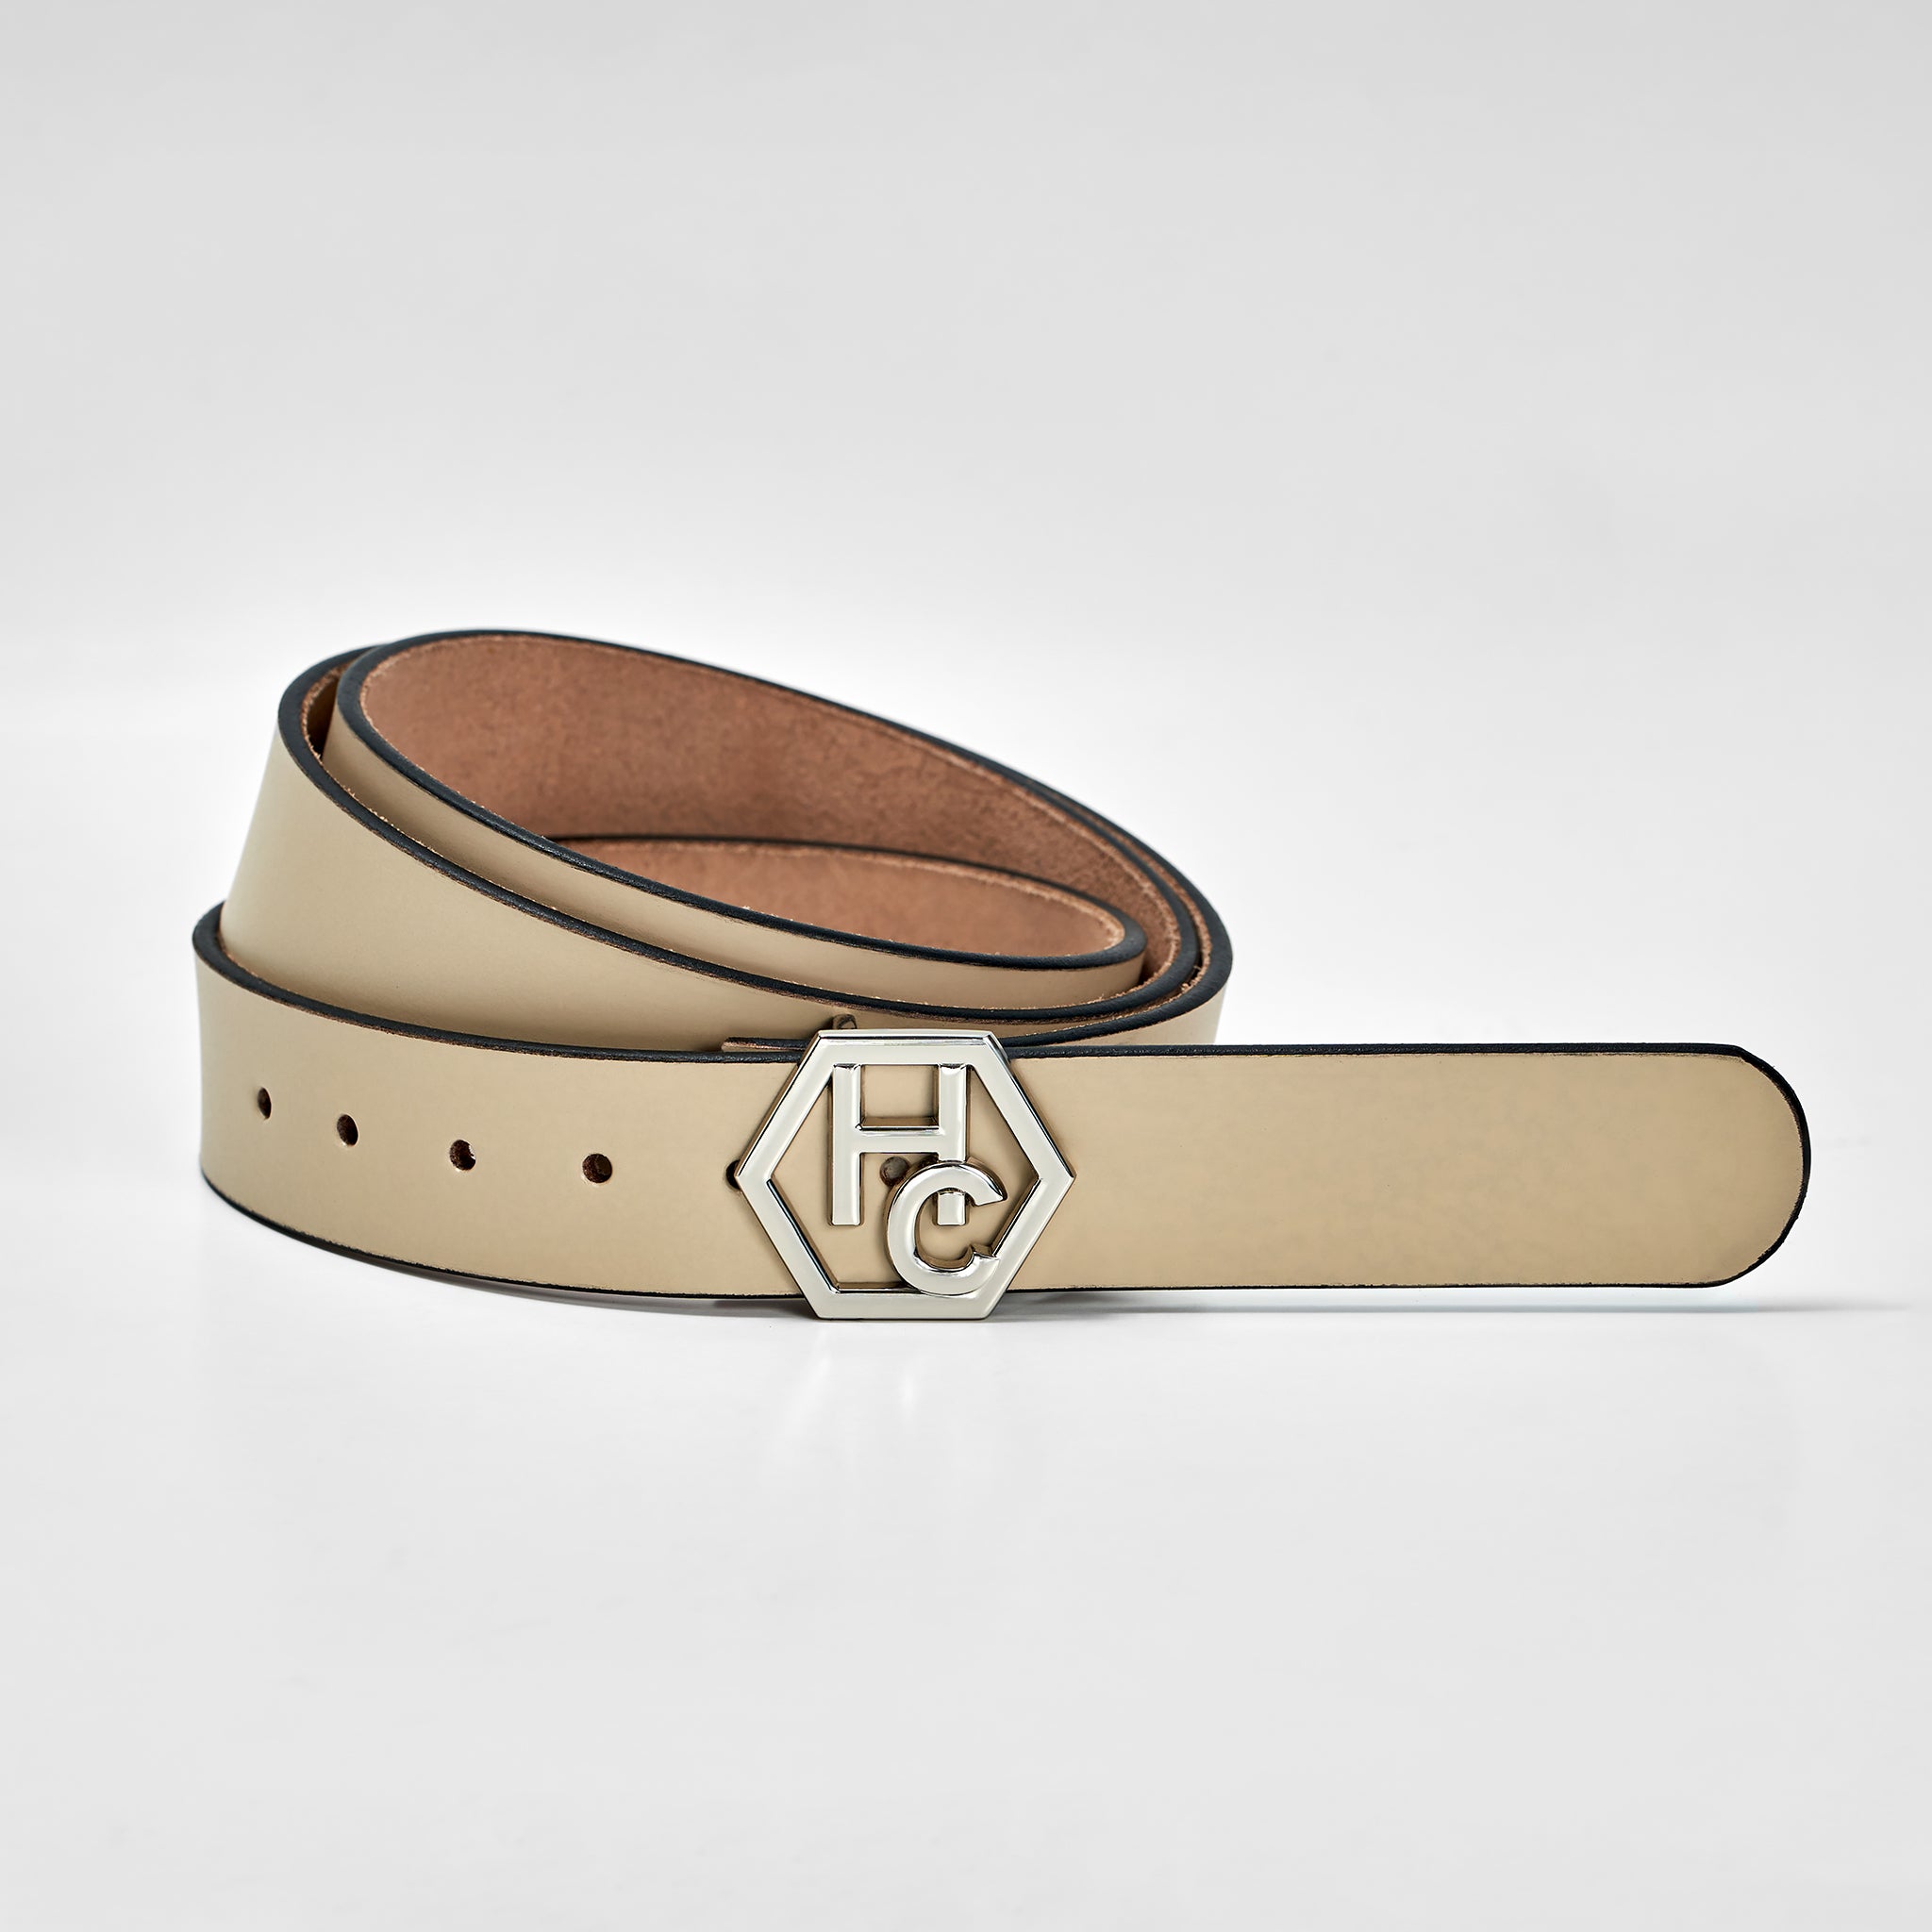 Hedonist Chicago Seamless Ivory Leather Belt 1.3." 32381376397463